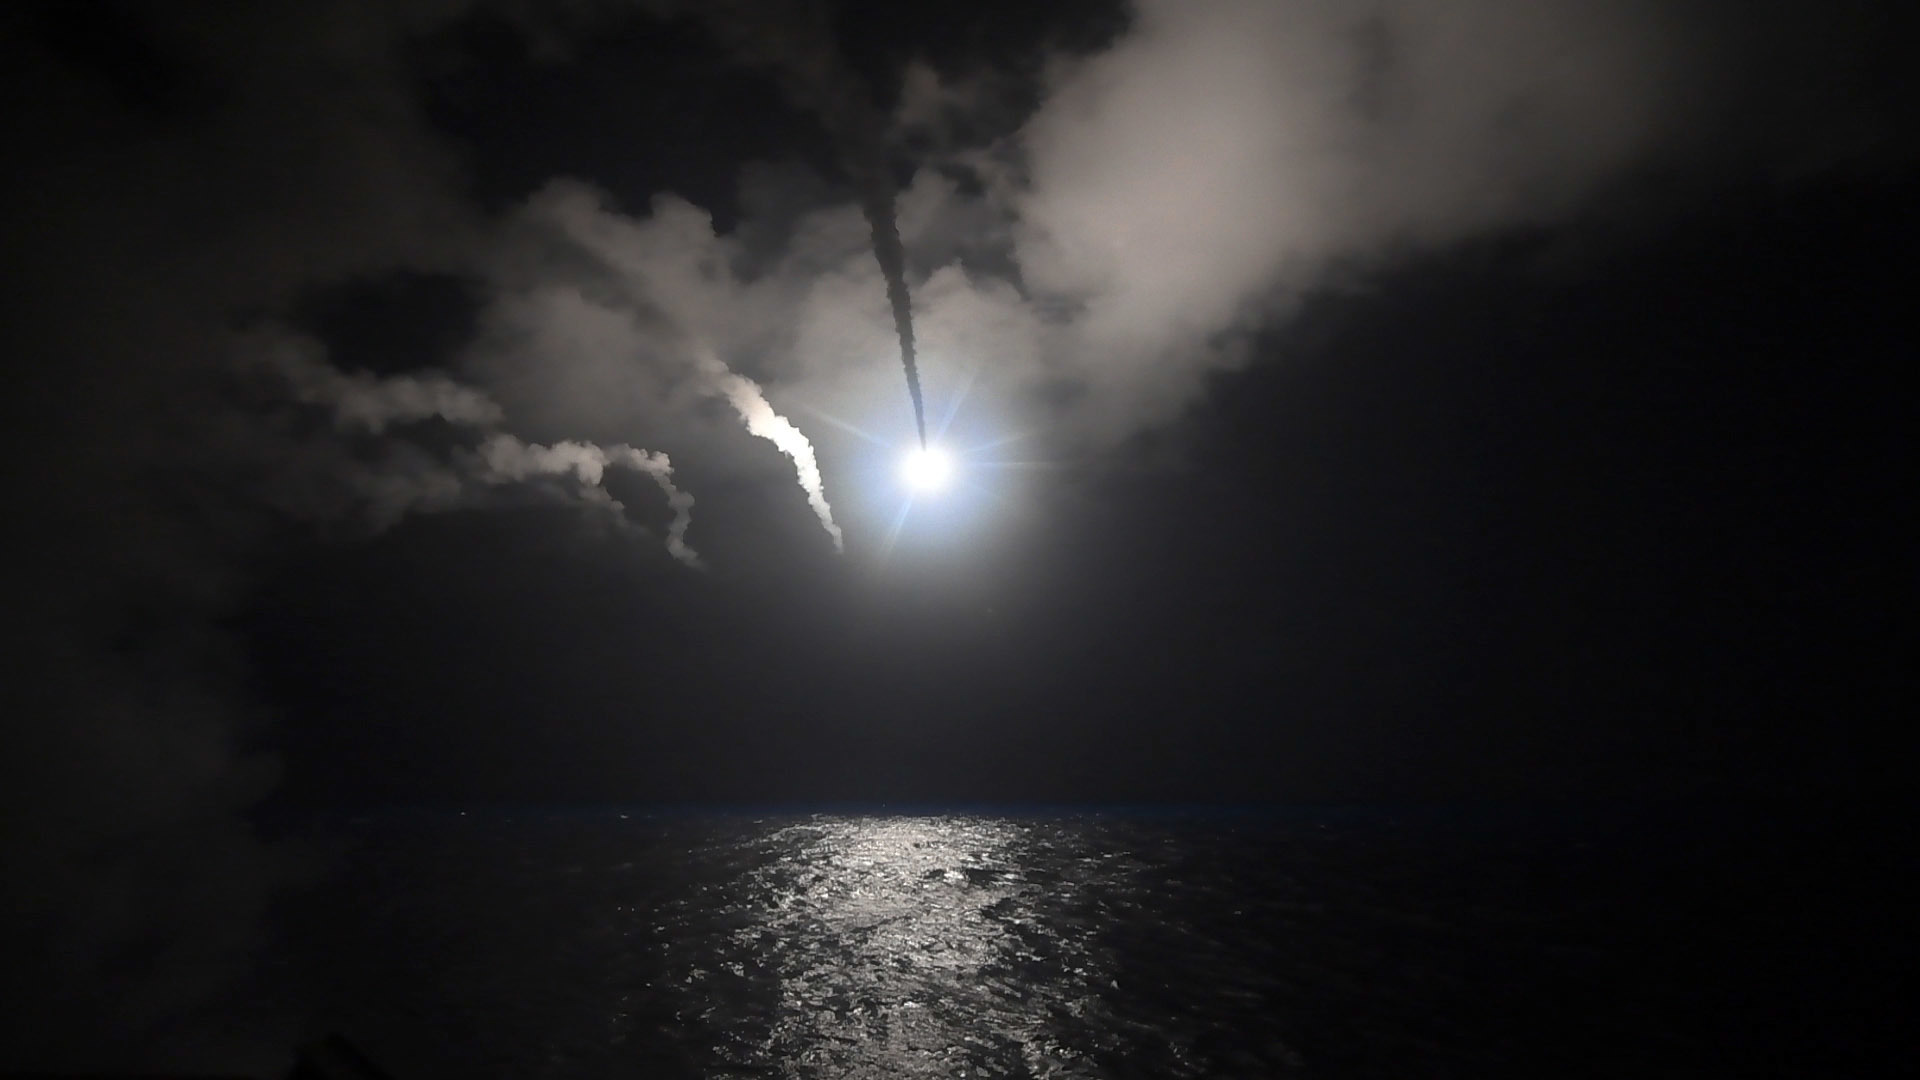 In this image provided by the U.S. Navy, the guided-missile destroyer USS Porter (DDG 78) launches a tomahawk land attack missile in the Mediterranean Sea, April 7, 2017.